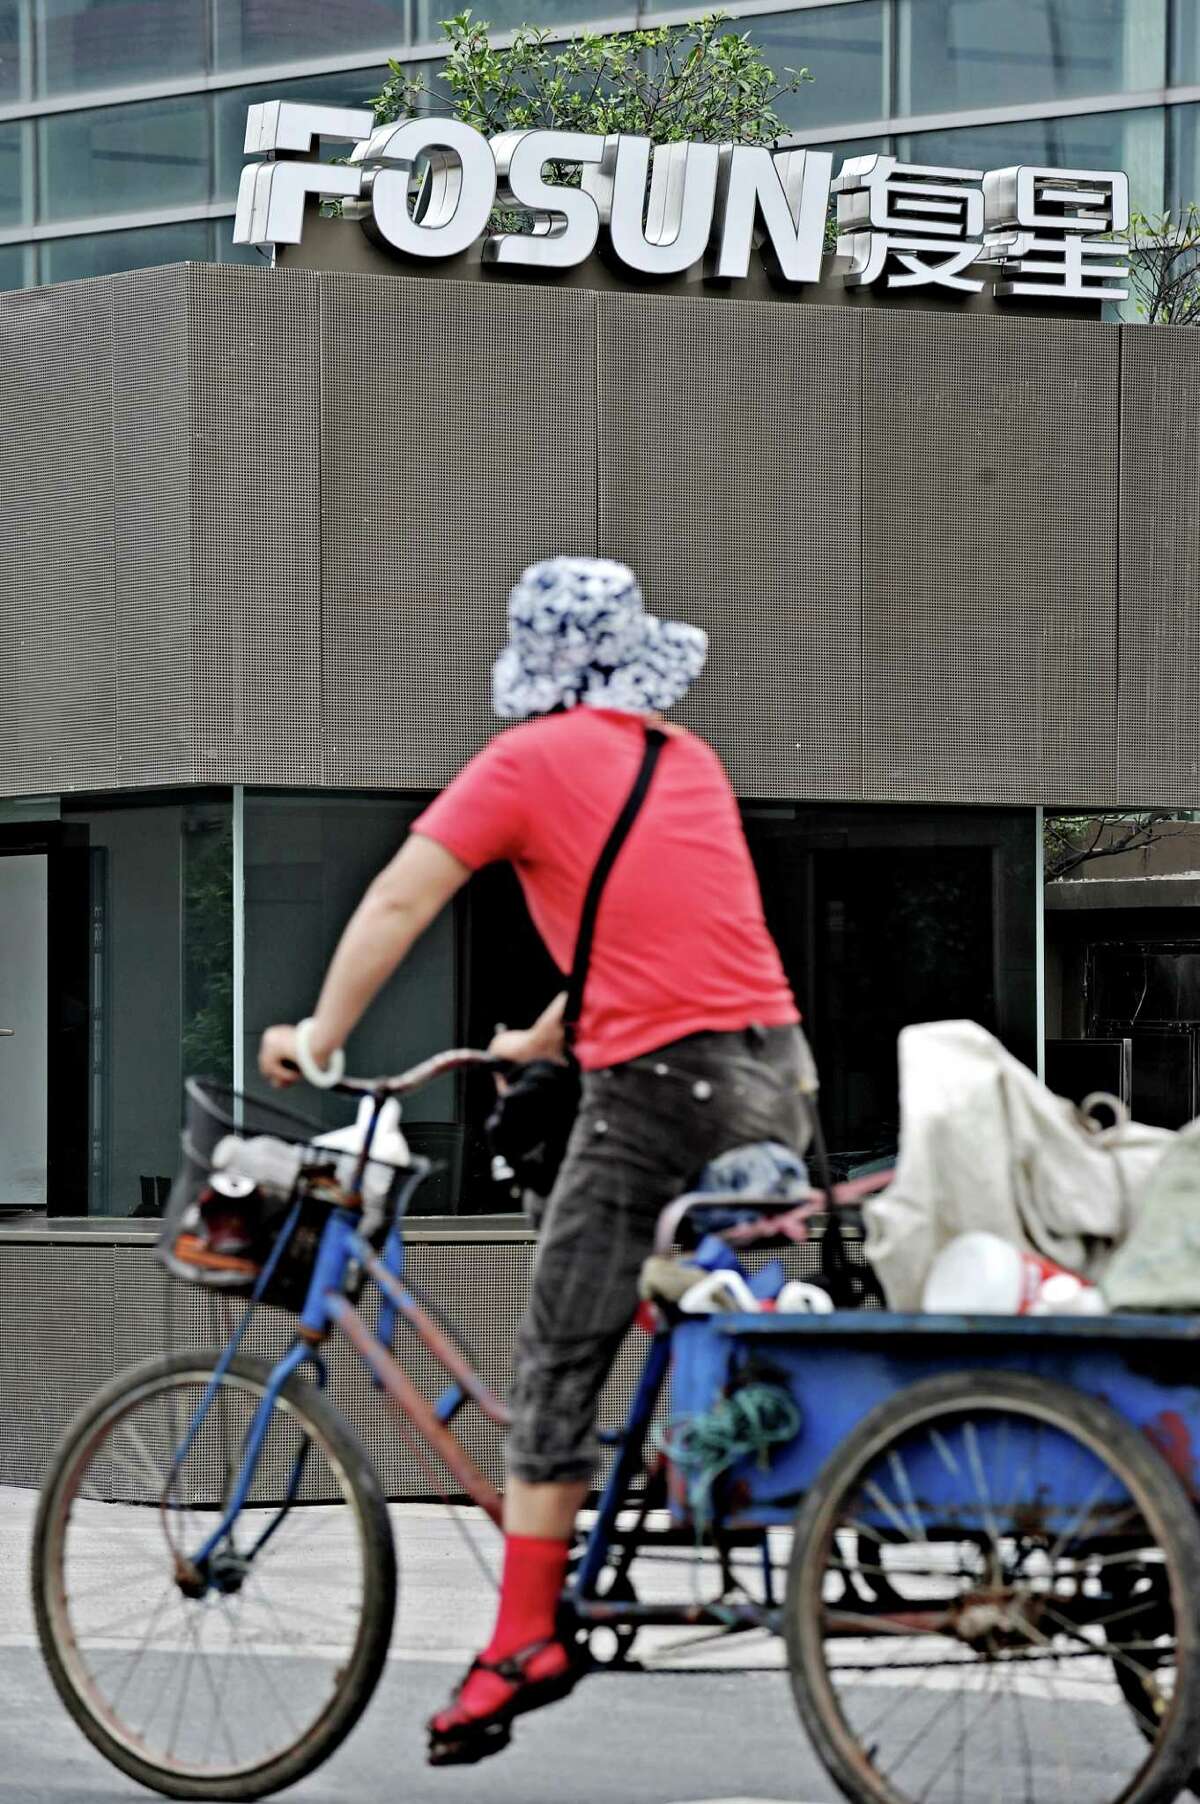 A woman rides a tricycle past the logo of Fosun Group, in front of the company's headquarters building in Shanghai on June 15, 2010. Chinese investment company Fosun bought a seven-percent stake in French leisure group Club Med, which is looking to tap the growing Chinese tourism market whose revenue last year totalled one trillion yuan (146 billion USD, 121 billion Euro). AFP PHOTO/PHILIPPE LOPEZ (Photo credit should read PHILIPPE LOPEZ/AFP/Getty Images)